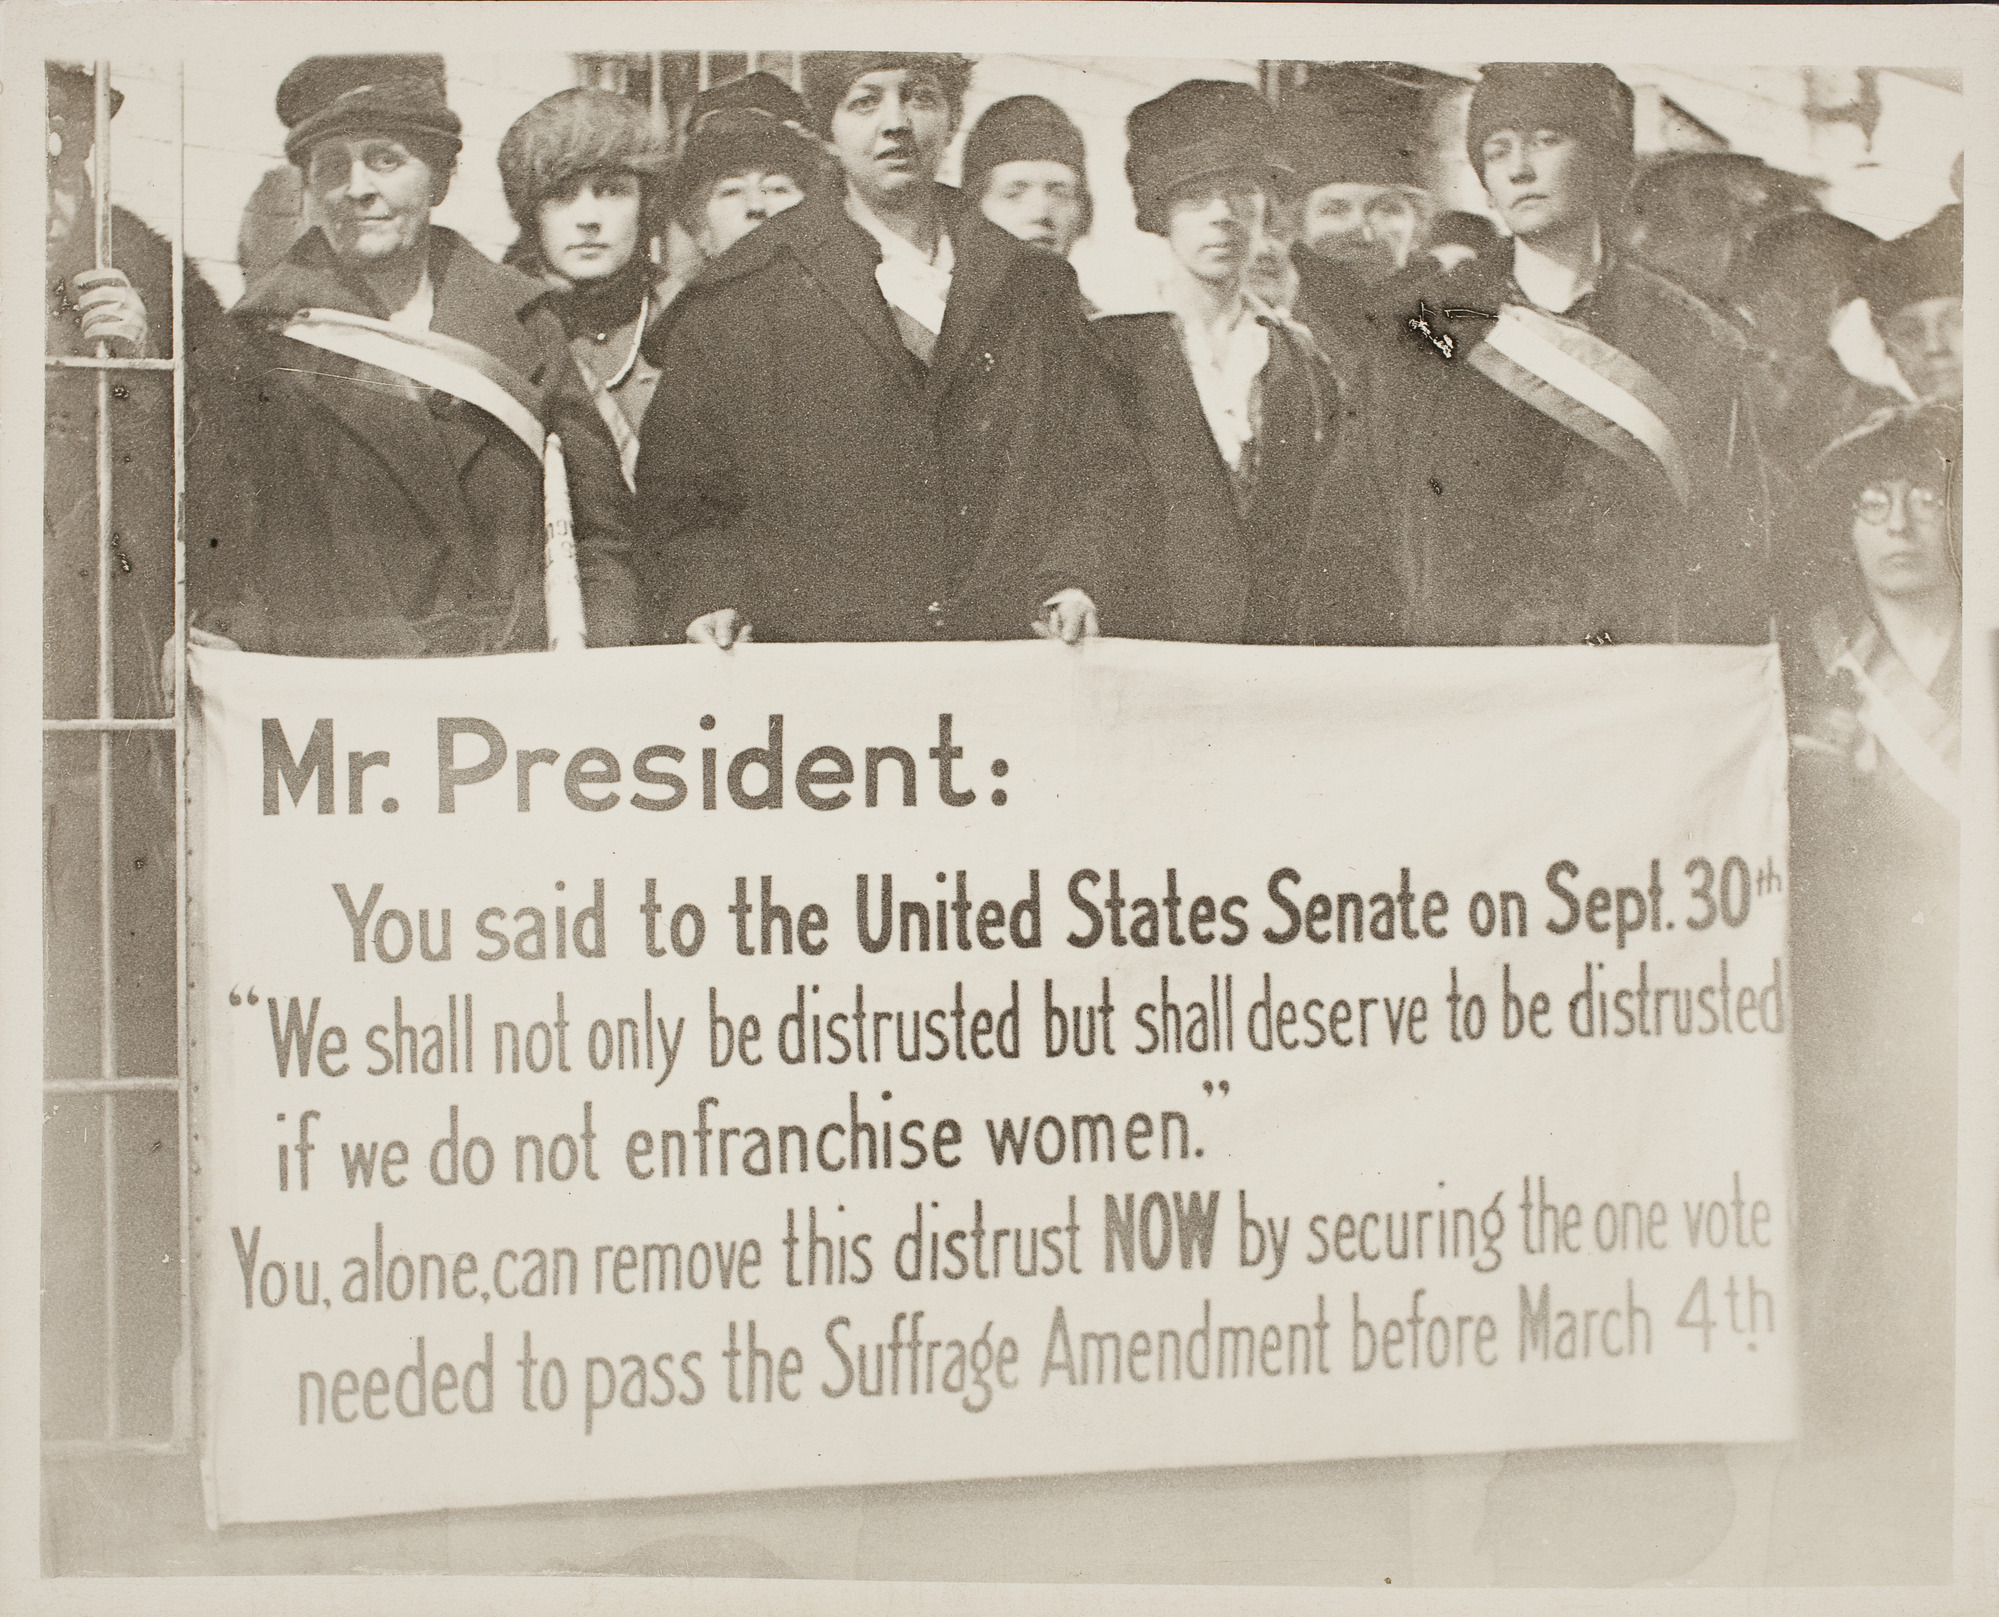 Suffragists with a protest banner during President Wilson's visit to Boston, Mass., Feb. 1919.